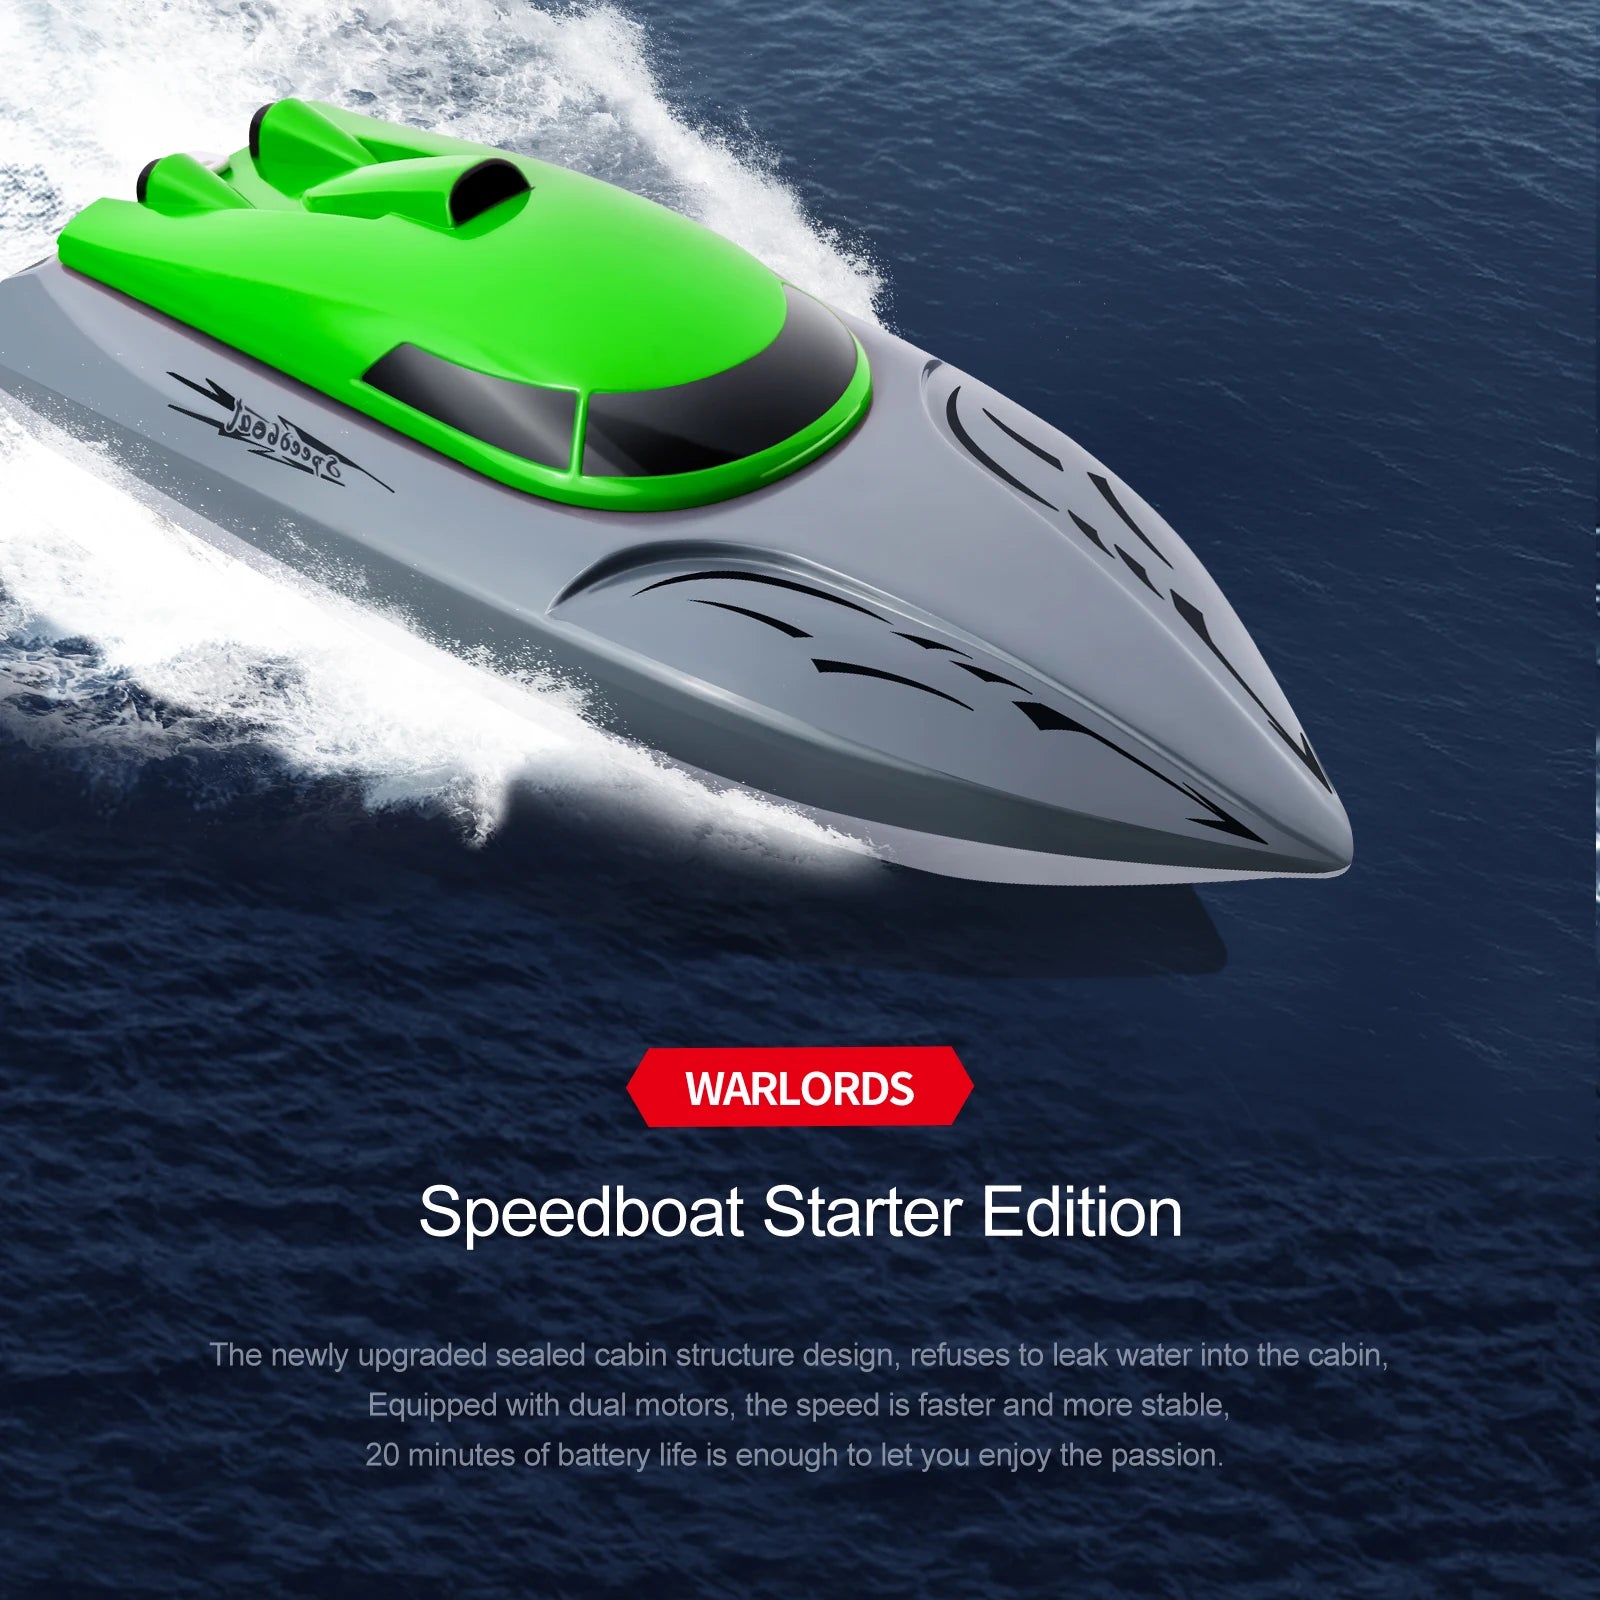 Rc Boat, WARLORDS Speedboat Starter Edition has dual motors, 20 minutes of battery life